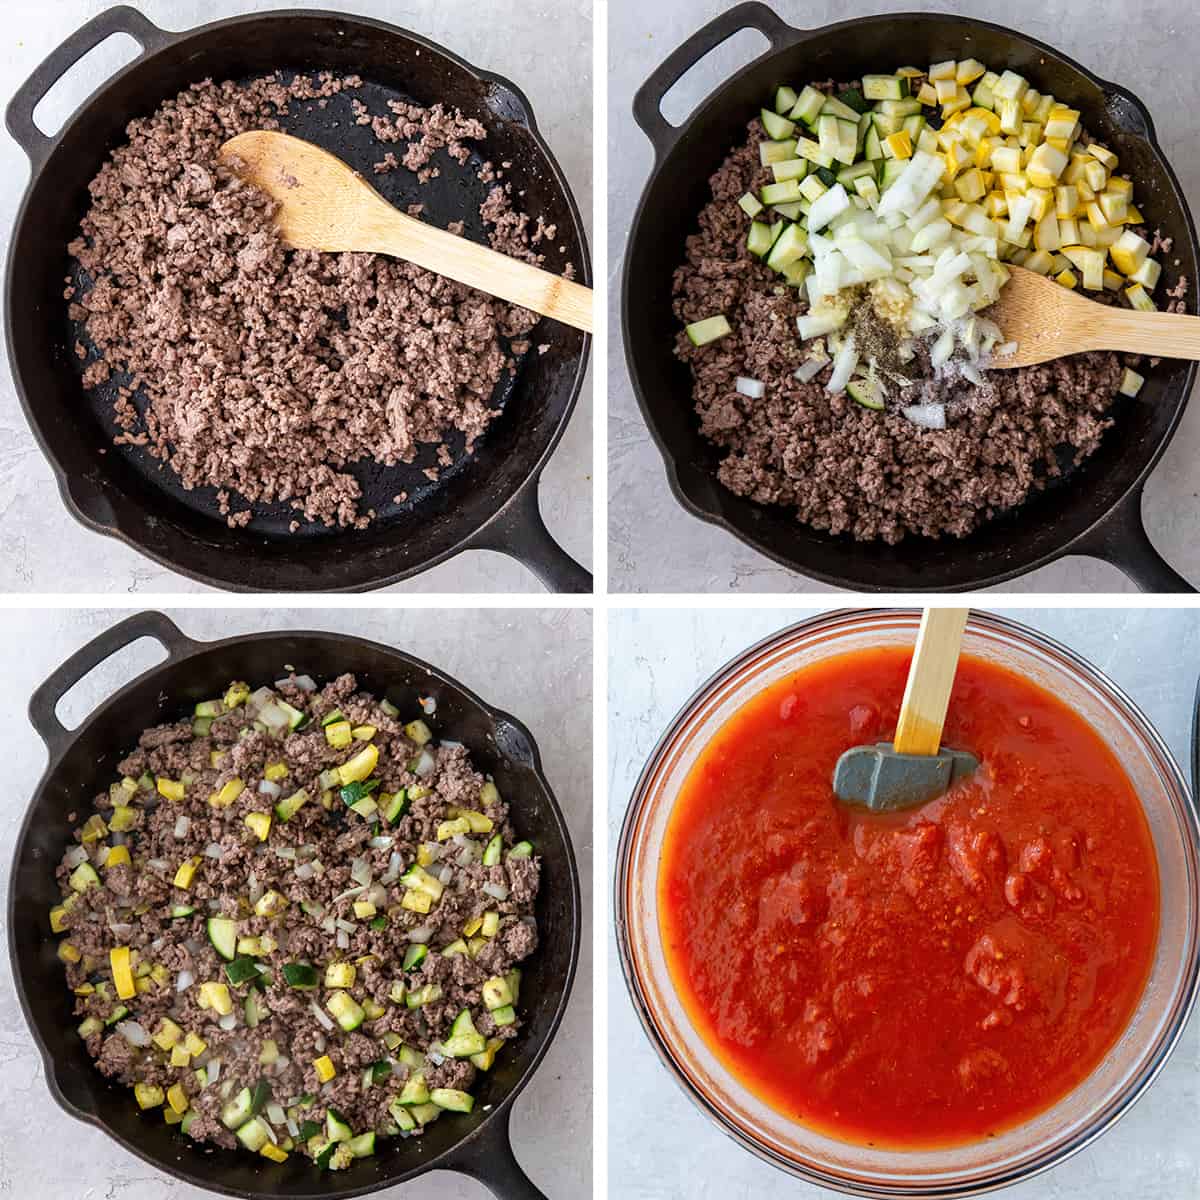 Ground beef and zucchini cooking in a skillet and marinara sauce in a bowl.